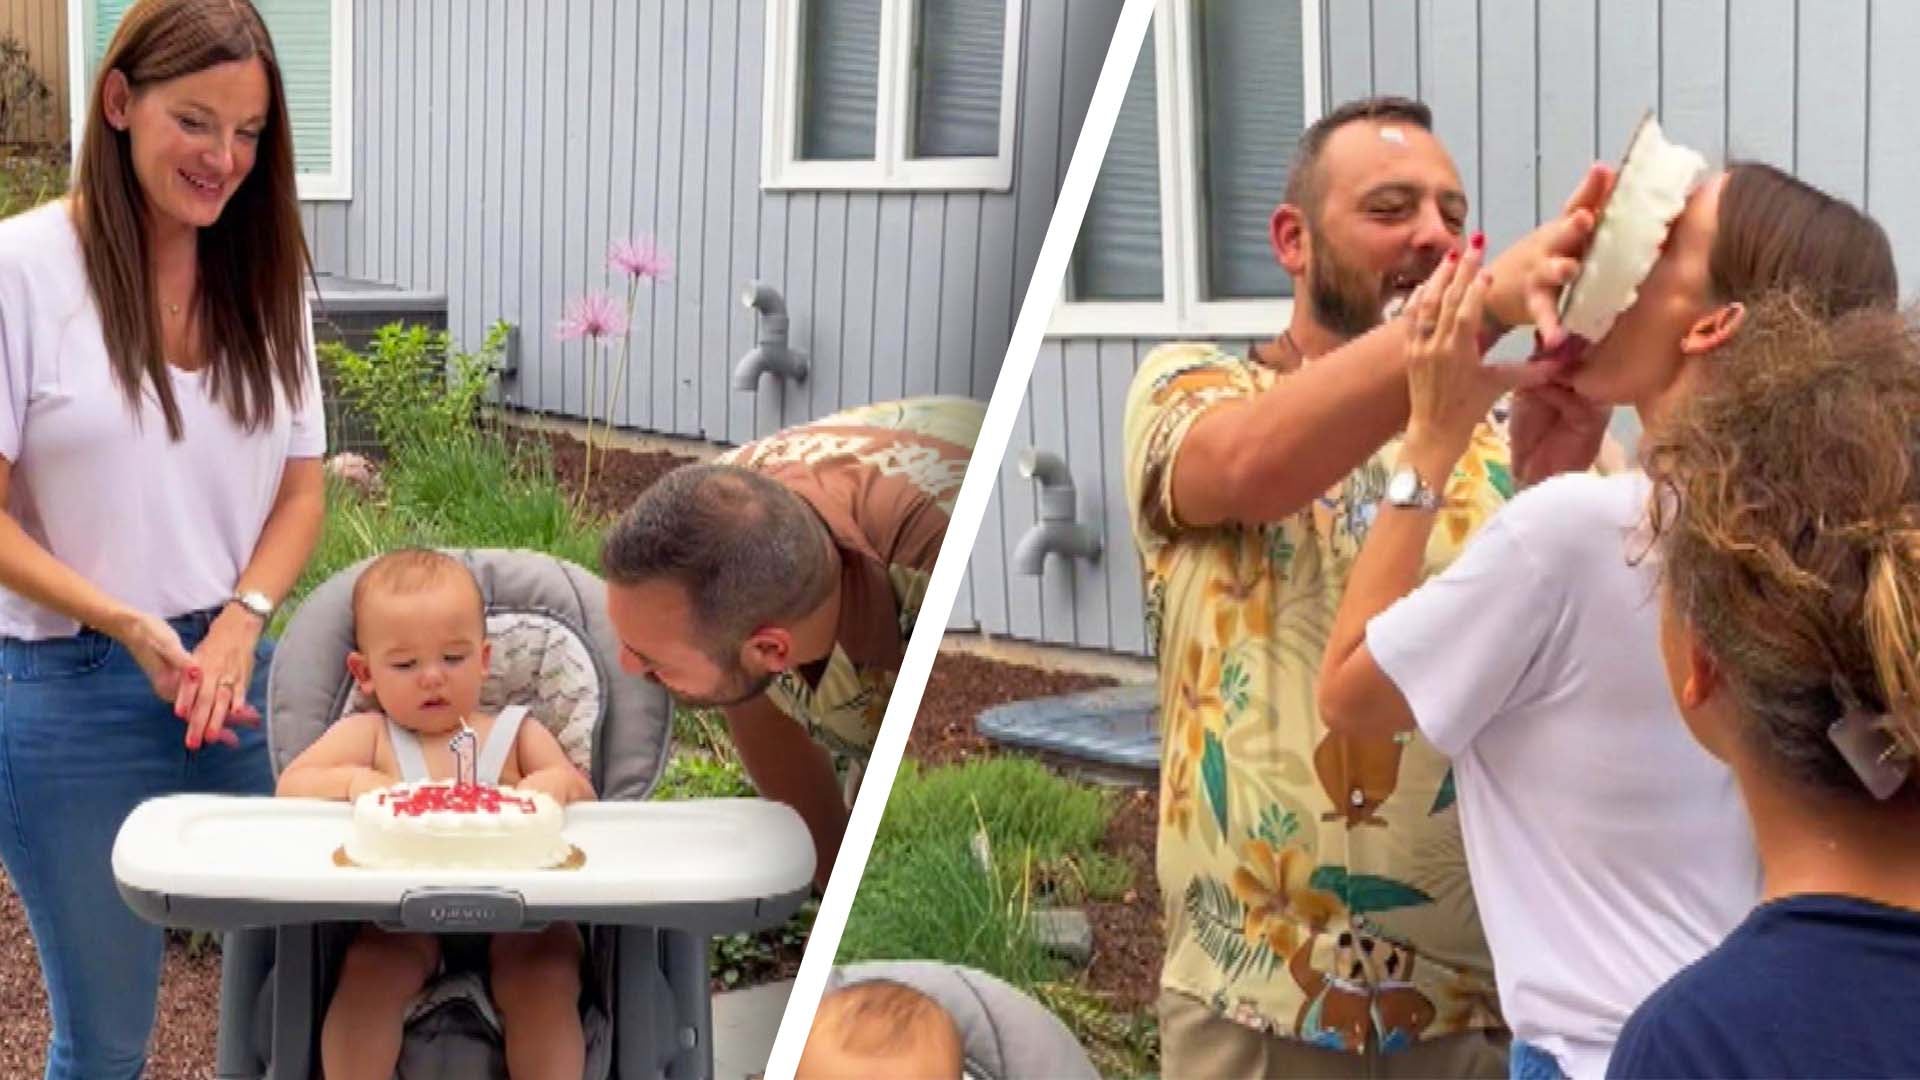 Mom Birthday Selebret Son With Hotel Pron - Husband Pushes Son's Birthday Cake in Wife's Face | Inside Edition